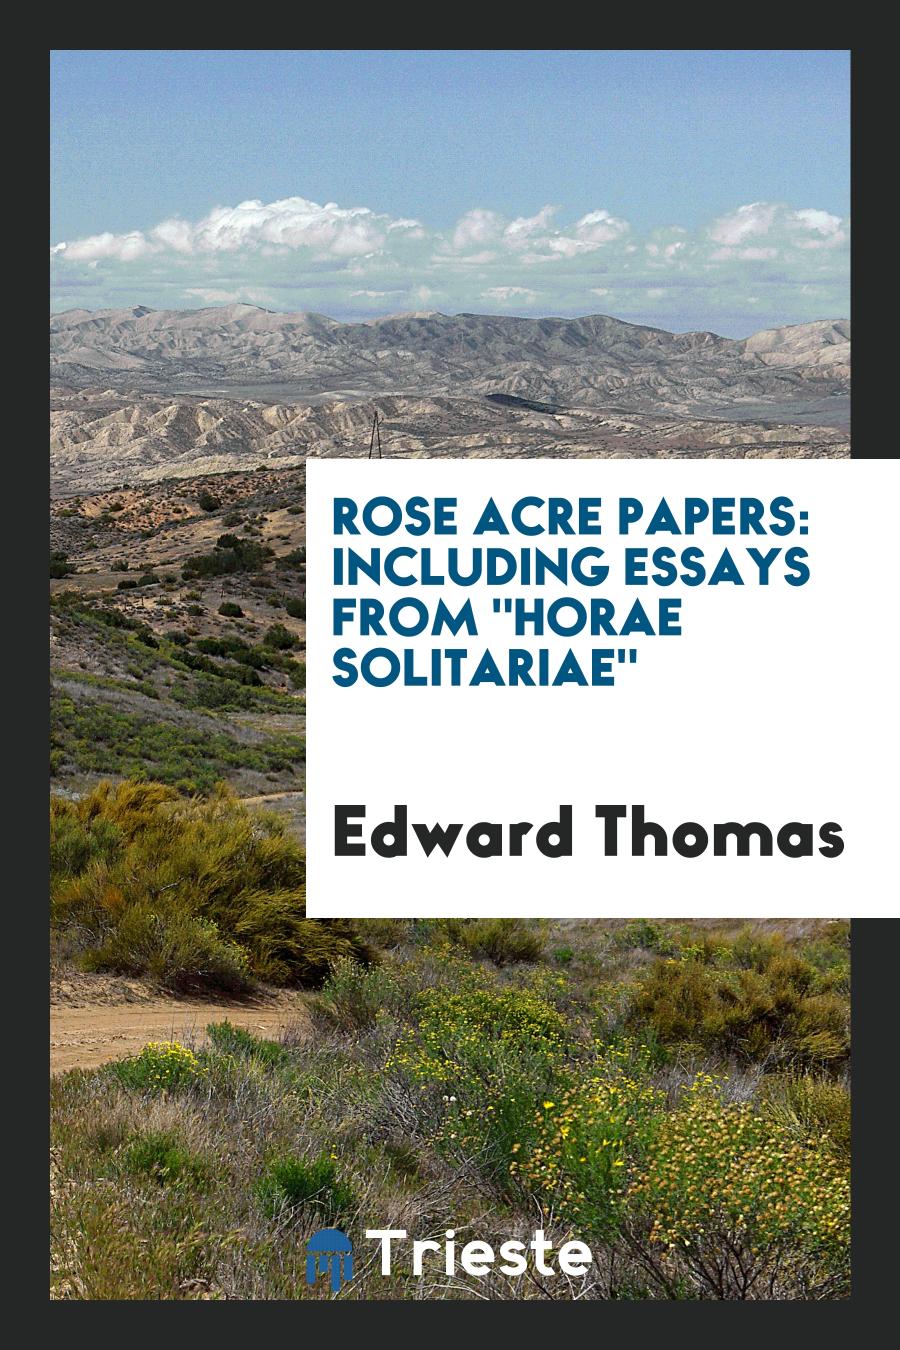 Rose Acre papers: including essays from "Horae solitariae"